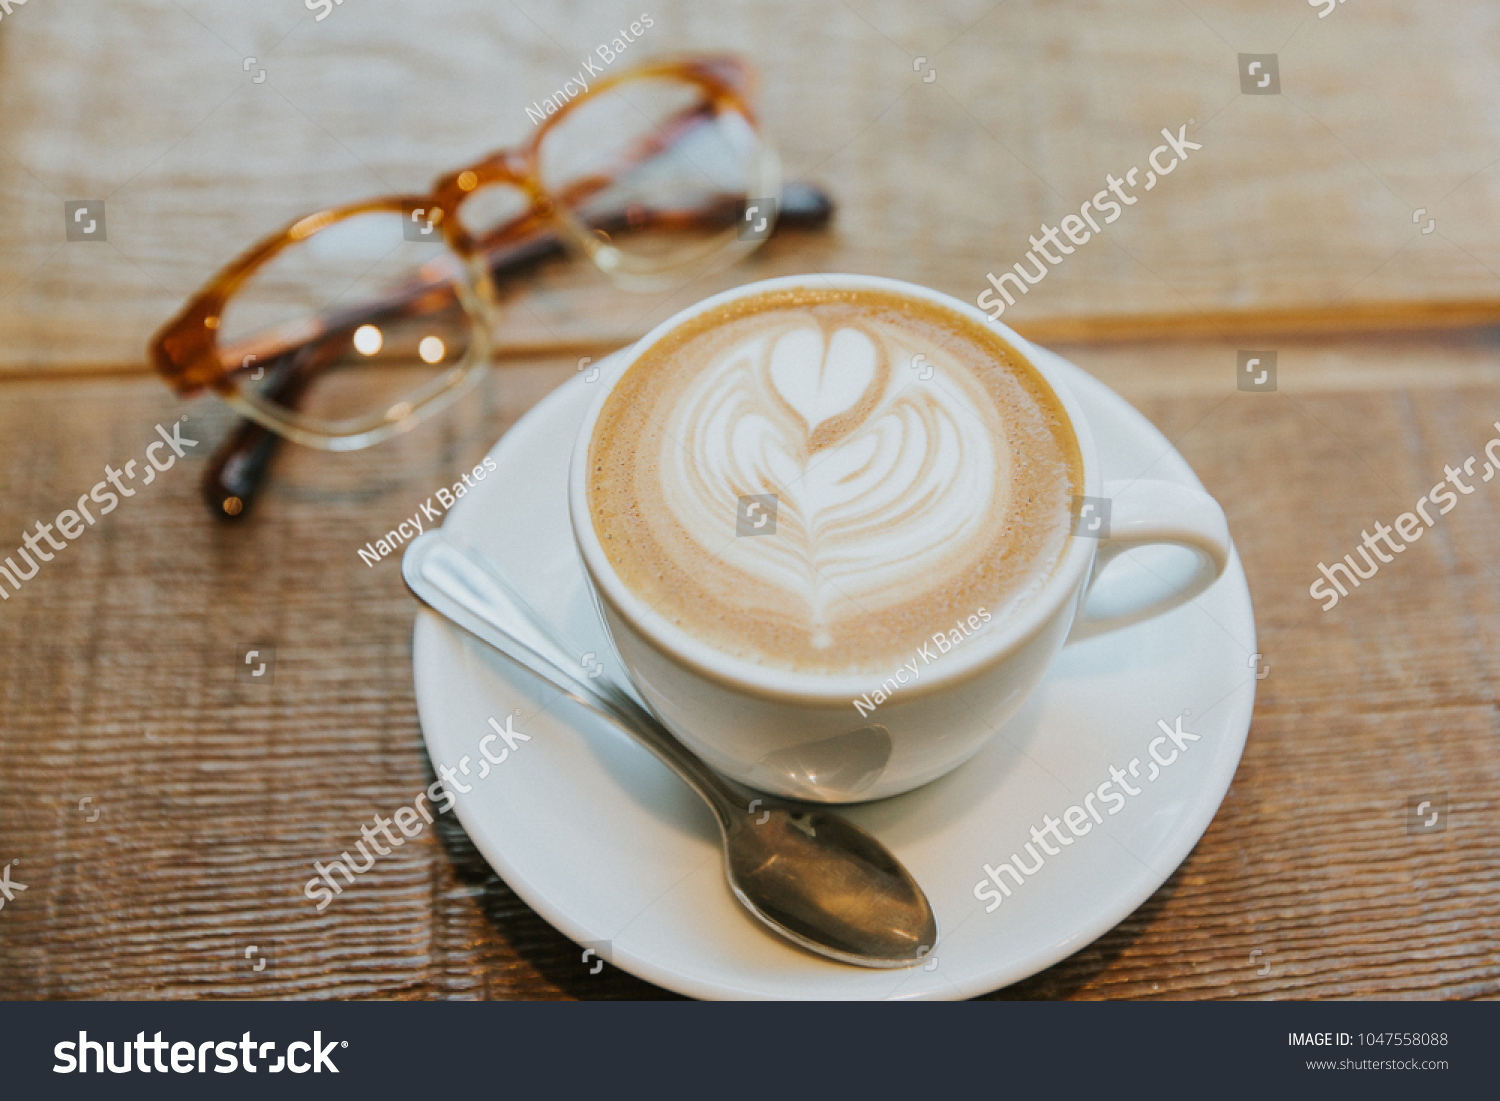 Latte art heart in simple white mug with plate and spoon on a wooden table with a pair of eye glasses #1047558088